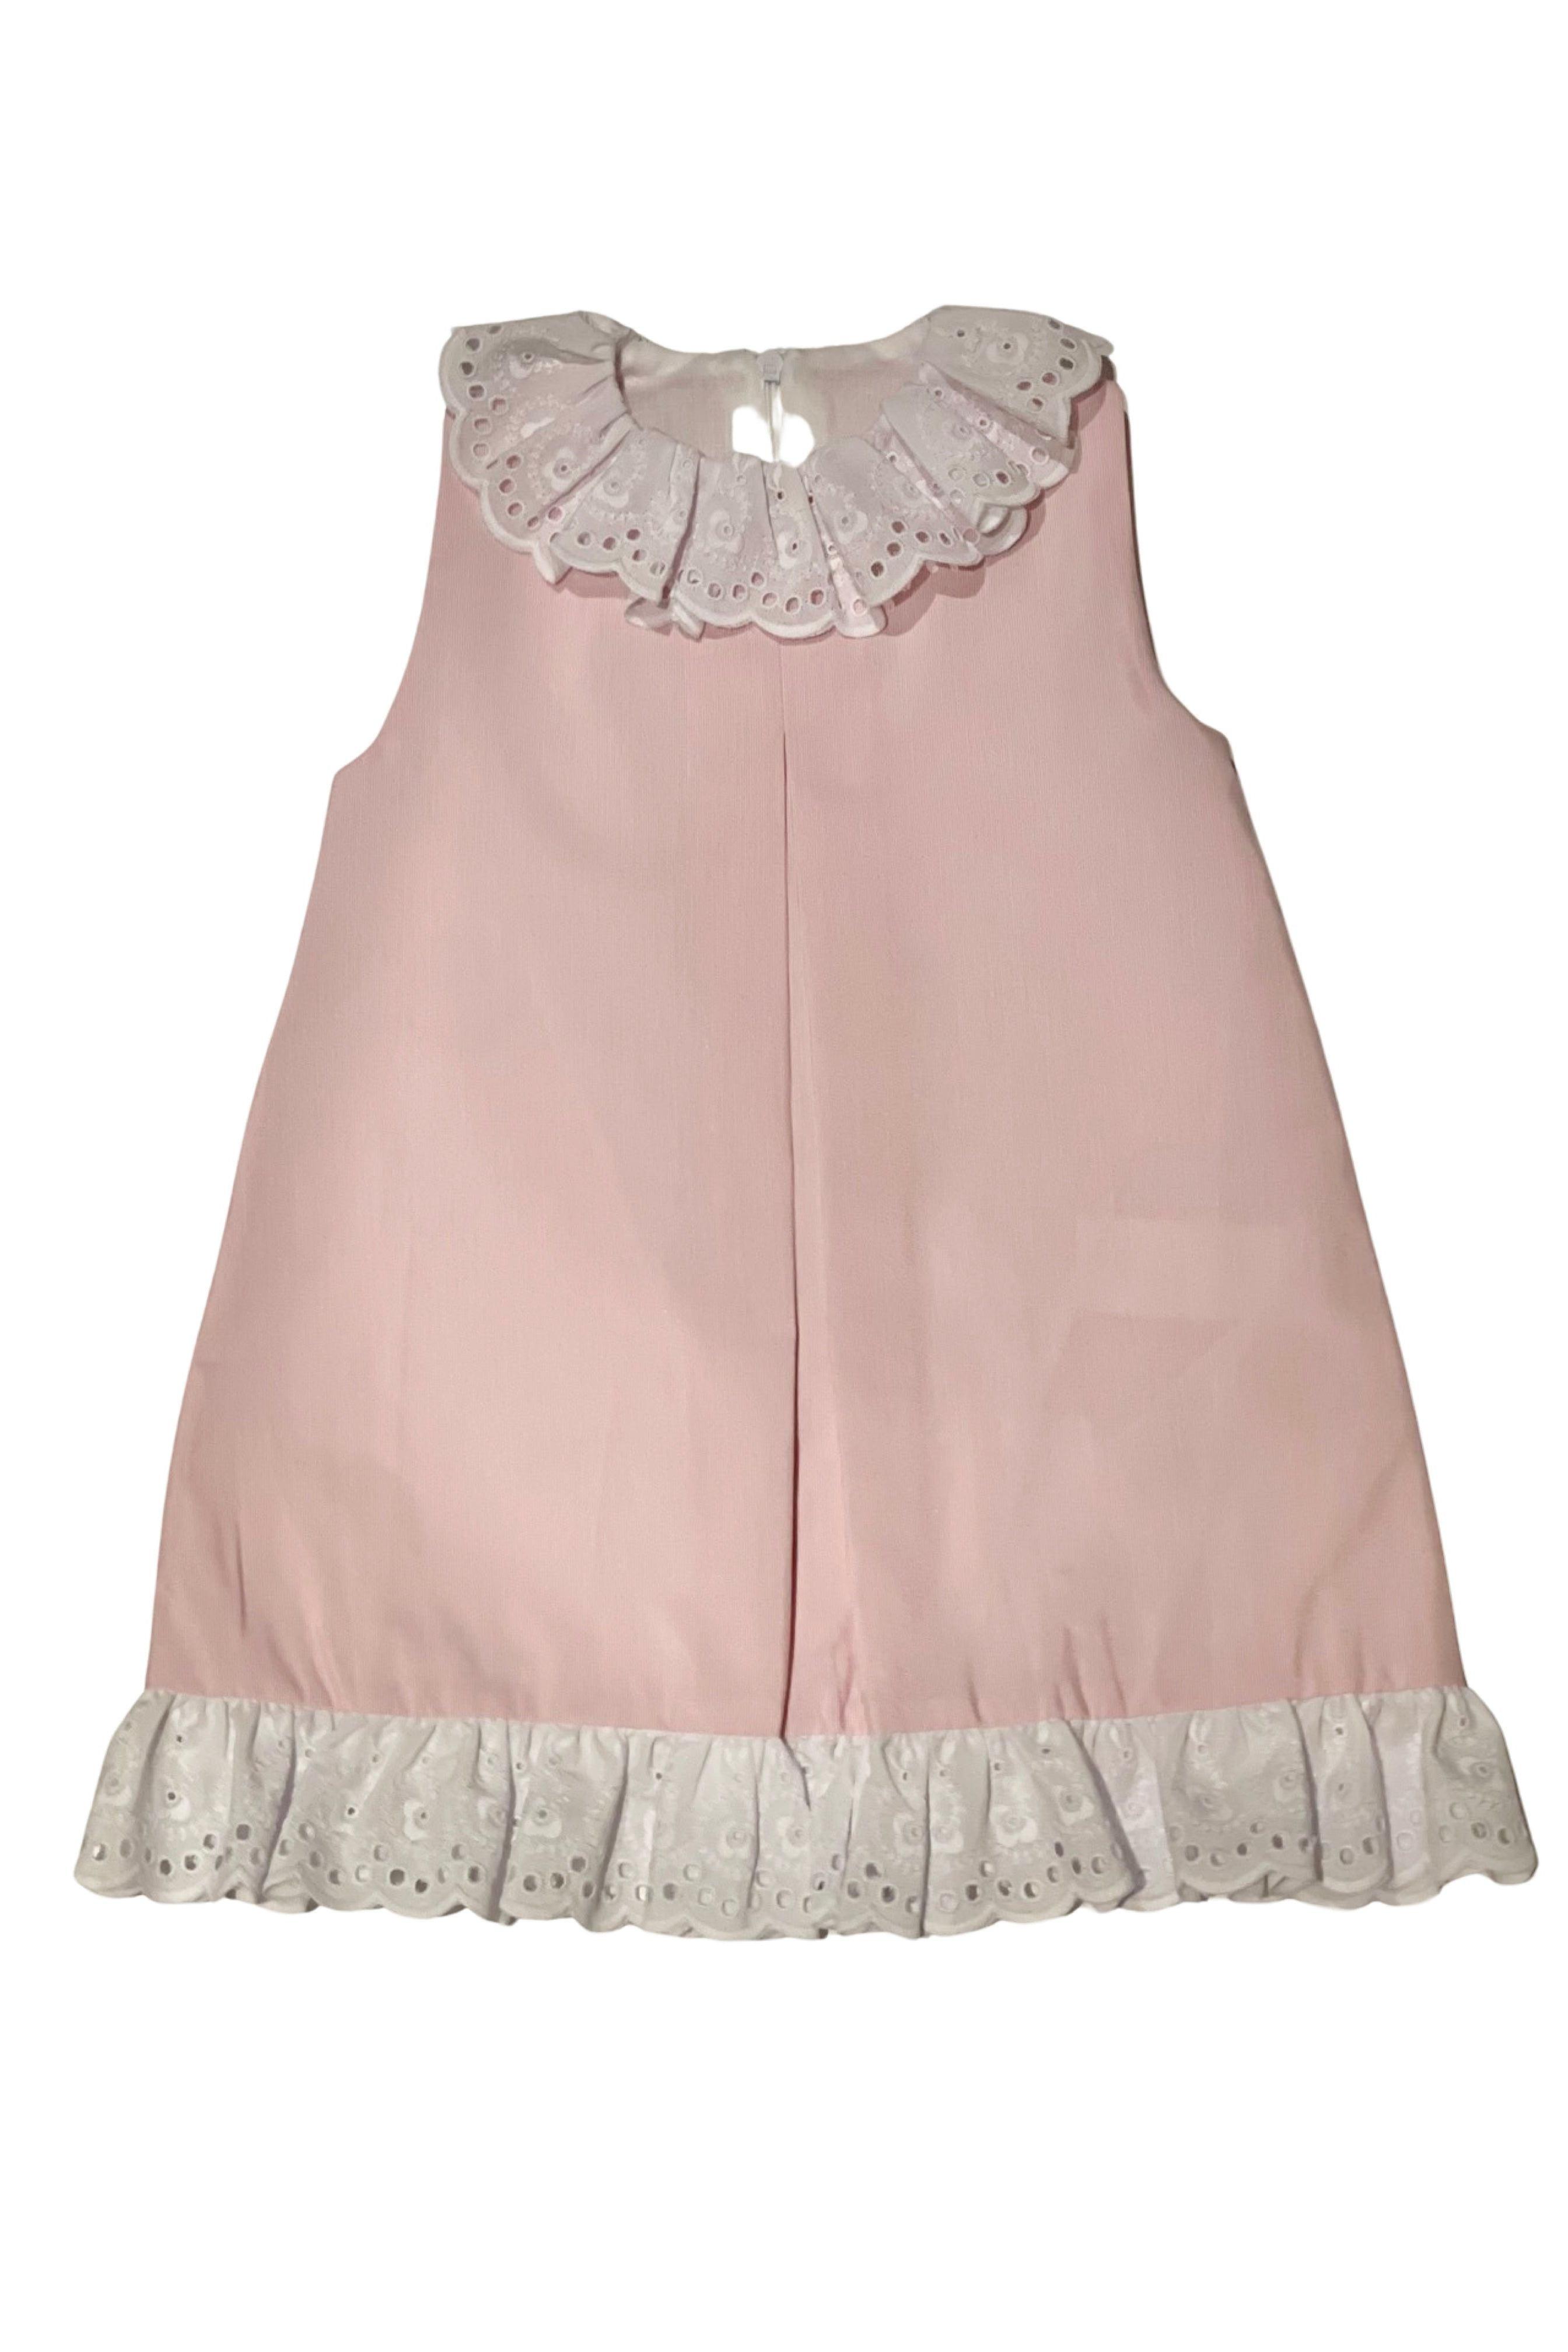 SS24 Lor Miral Girls Pink A Line Dress Dainty Delilah